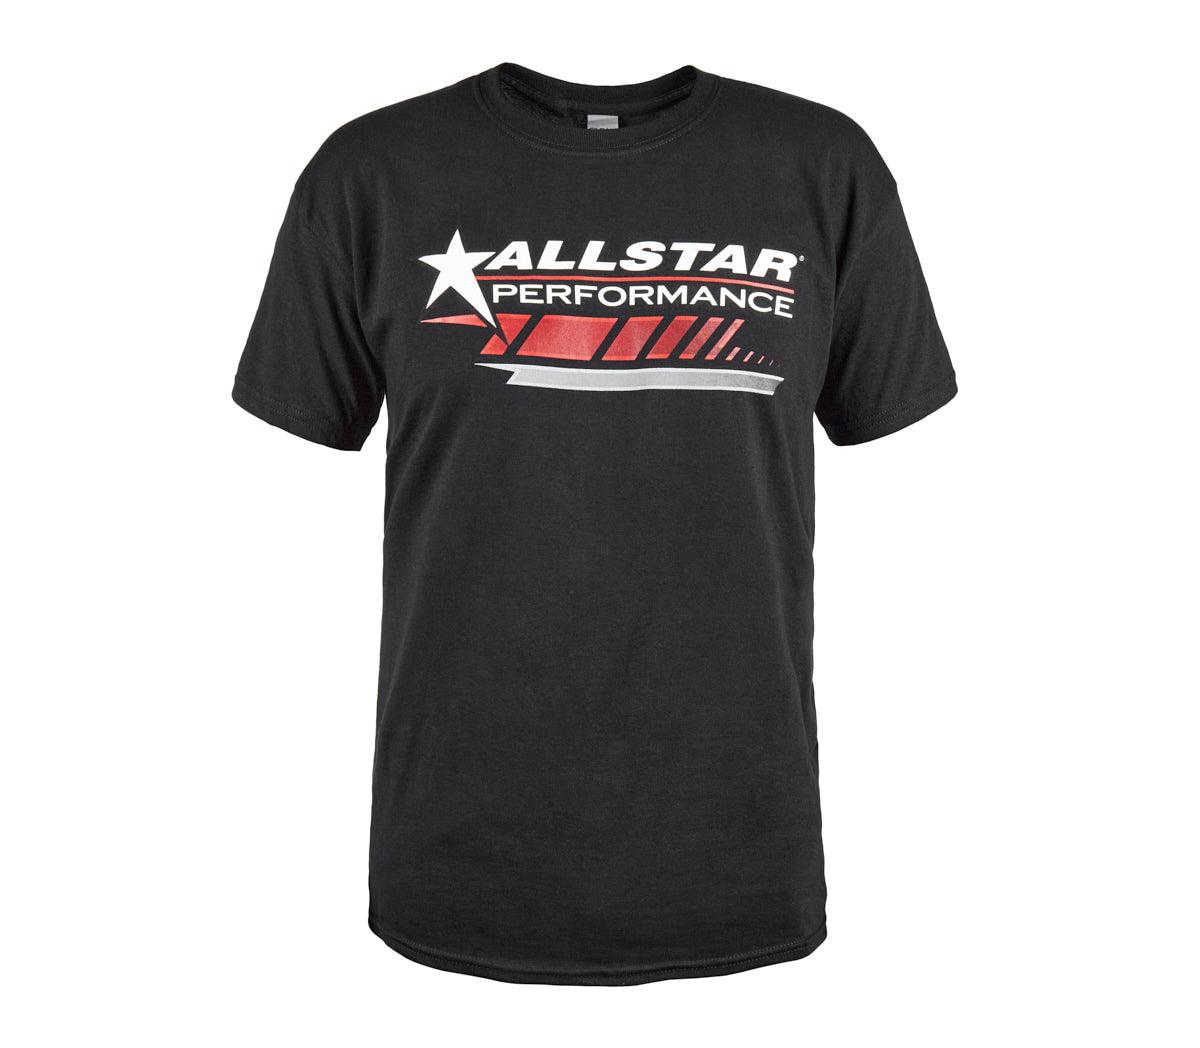 Allstar T-Shirt Black w/ Red Graphic Small - Burlile Performance Products